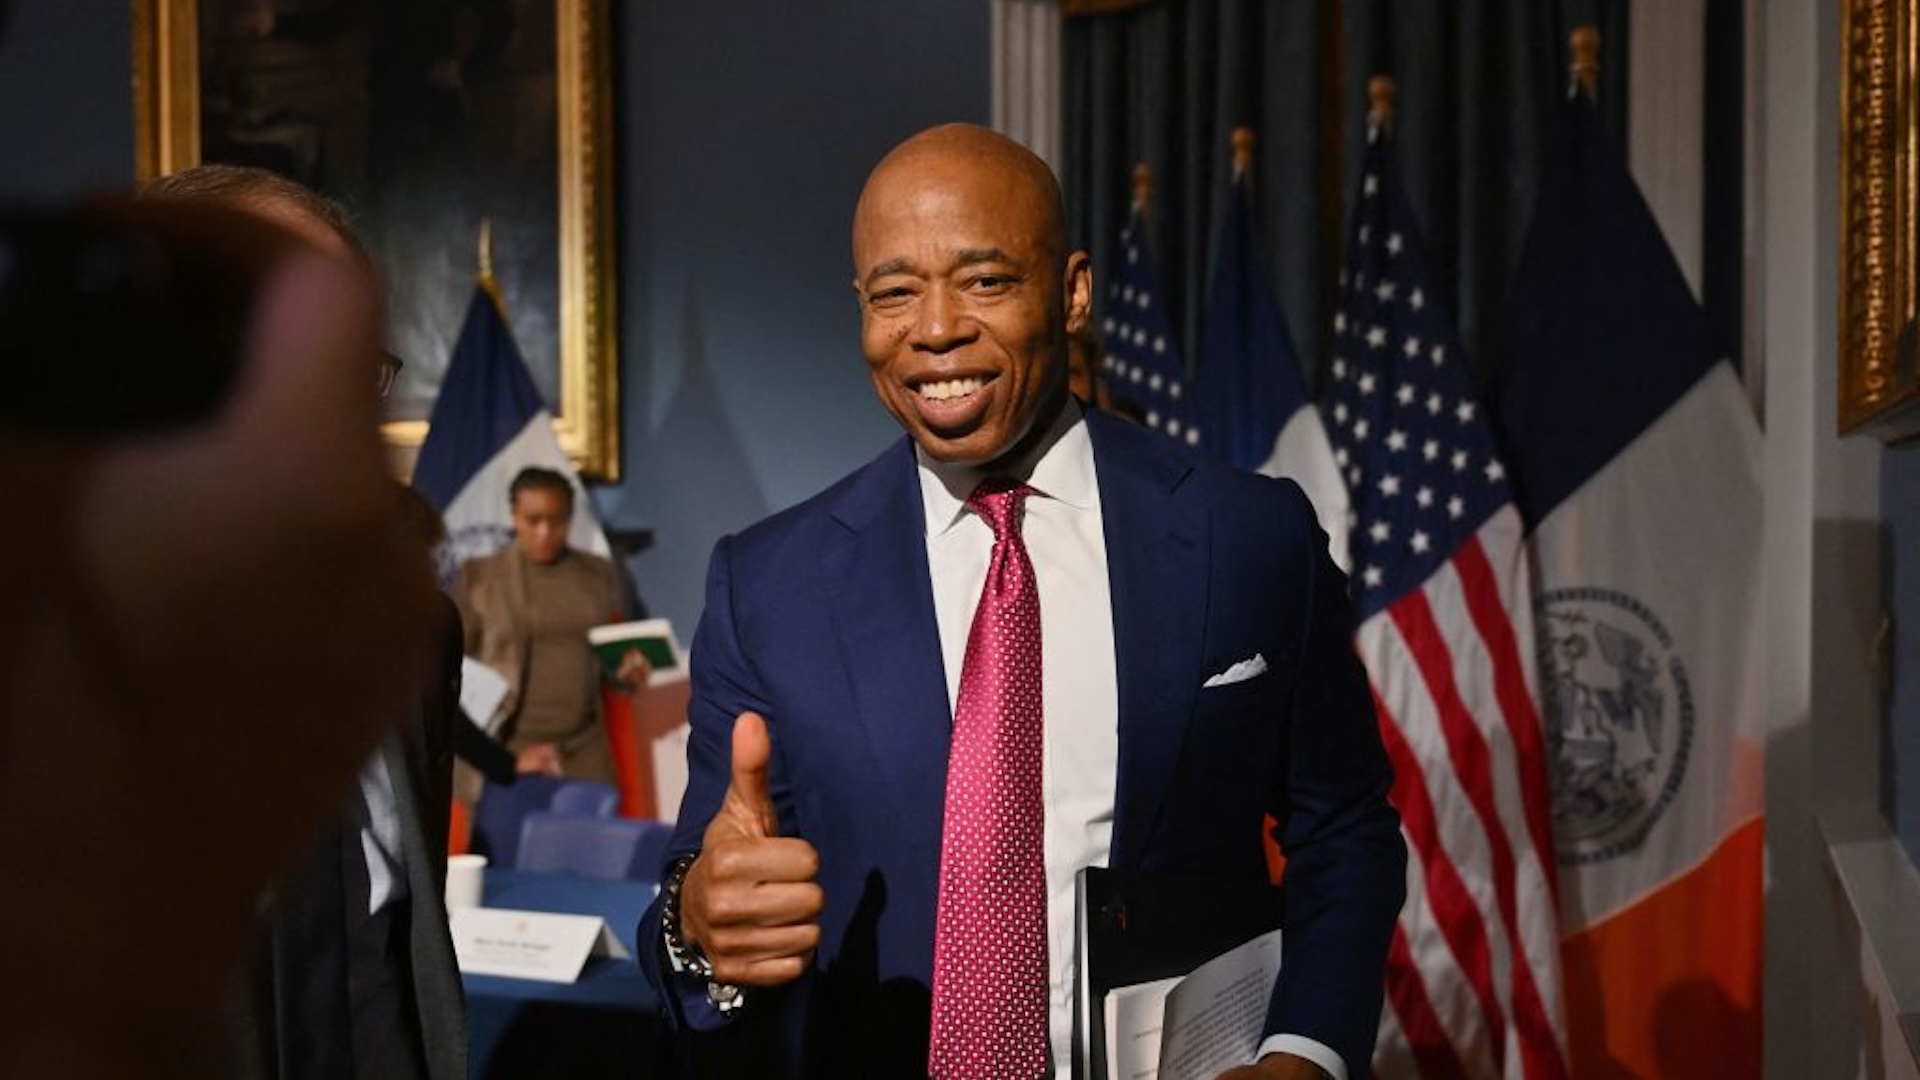 New York Mayor Eric Adams gives a thumbs up as he leaves his weekly press conference at New York City Hall on November 14, 2023. FBI agents seized the New York mayor's cell phones and other devices, his campaign lawyer said 10 November, 2023, in an apparent escalation of a federal investigation into campaign fundraising. The seizure appears to be part of a corruption investigation into whether Eric Adams' 2021 campaign conspired with Turkey's government and others.